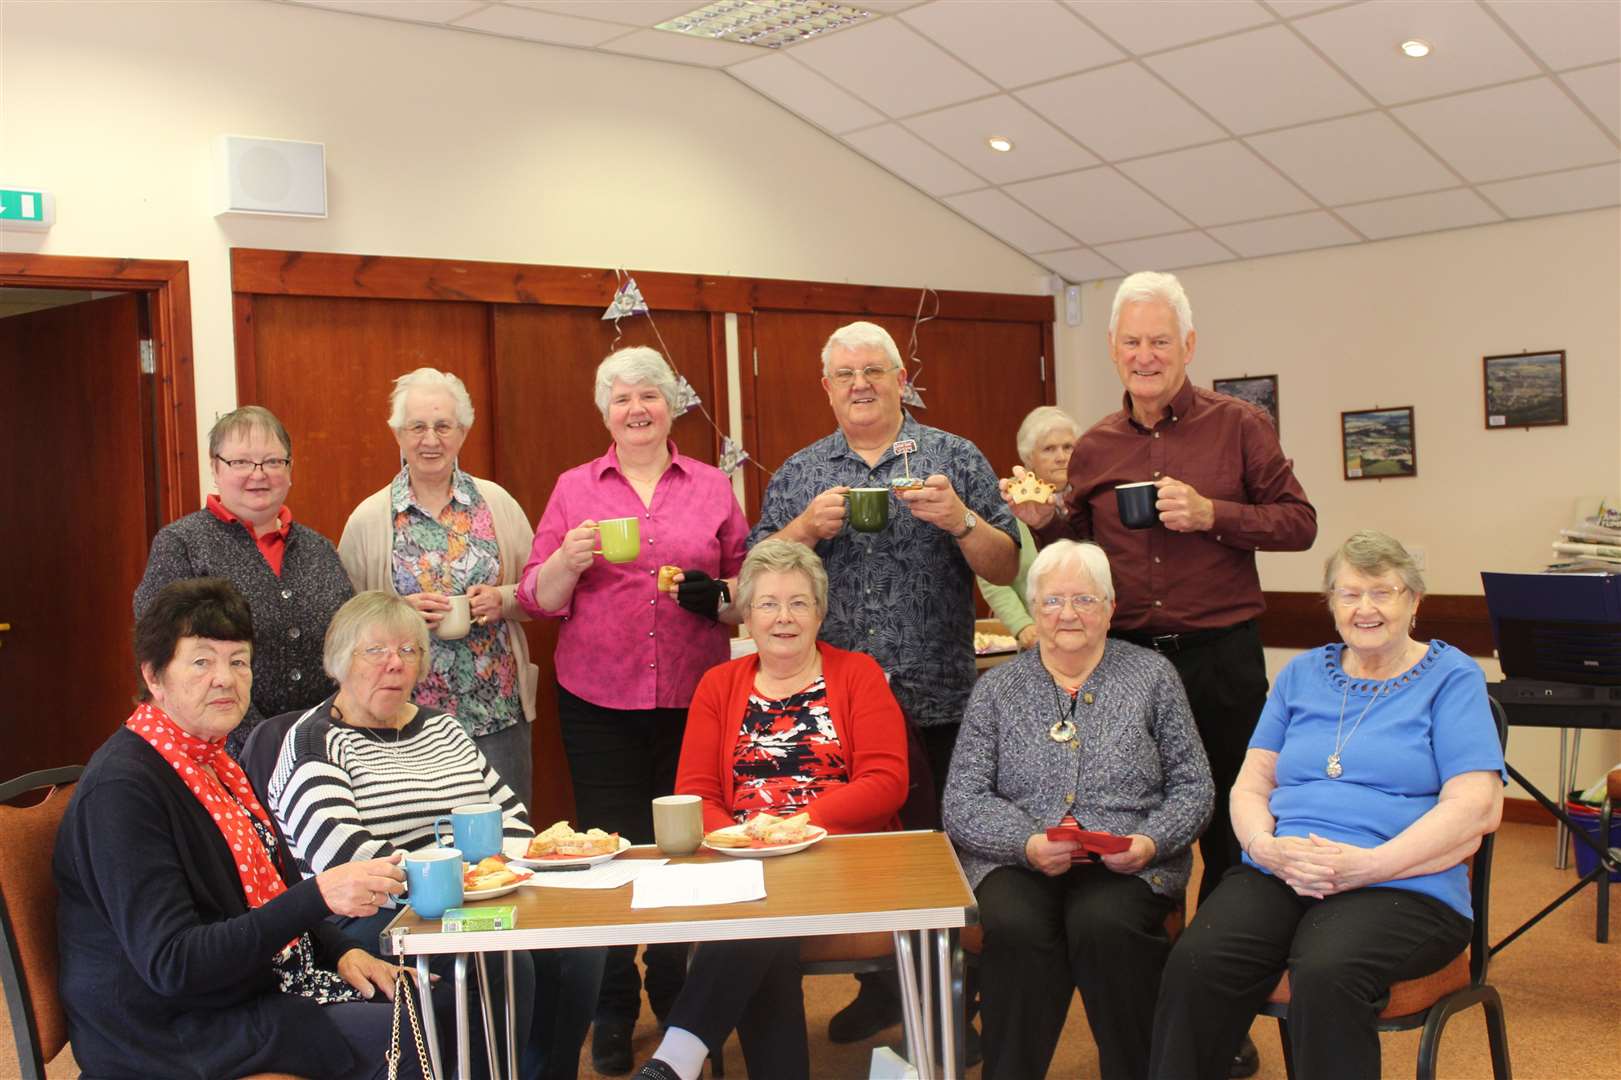 The Tuesday Centre group members in Kemnay enjoyed a Queen's Platinum Jubilee party with entertainment from Ian Dow, Eva Will and Ian Booth. Picture: Griselda McGregor